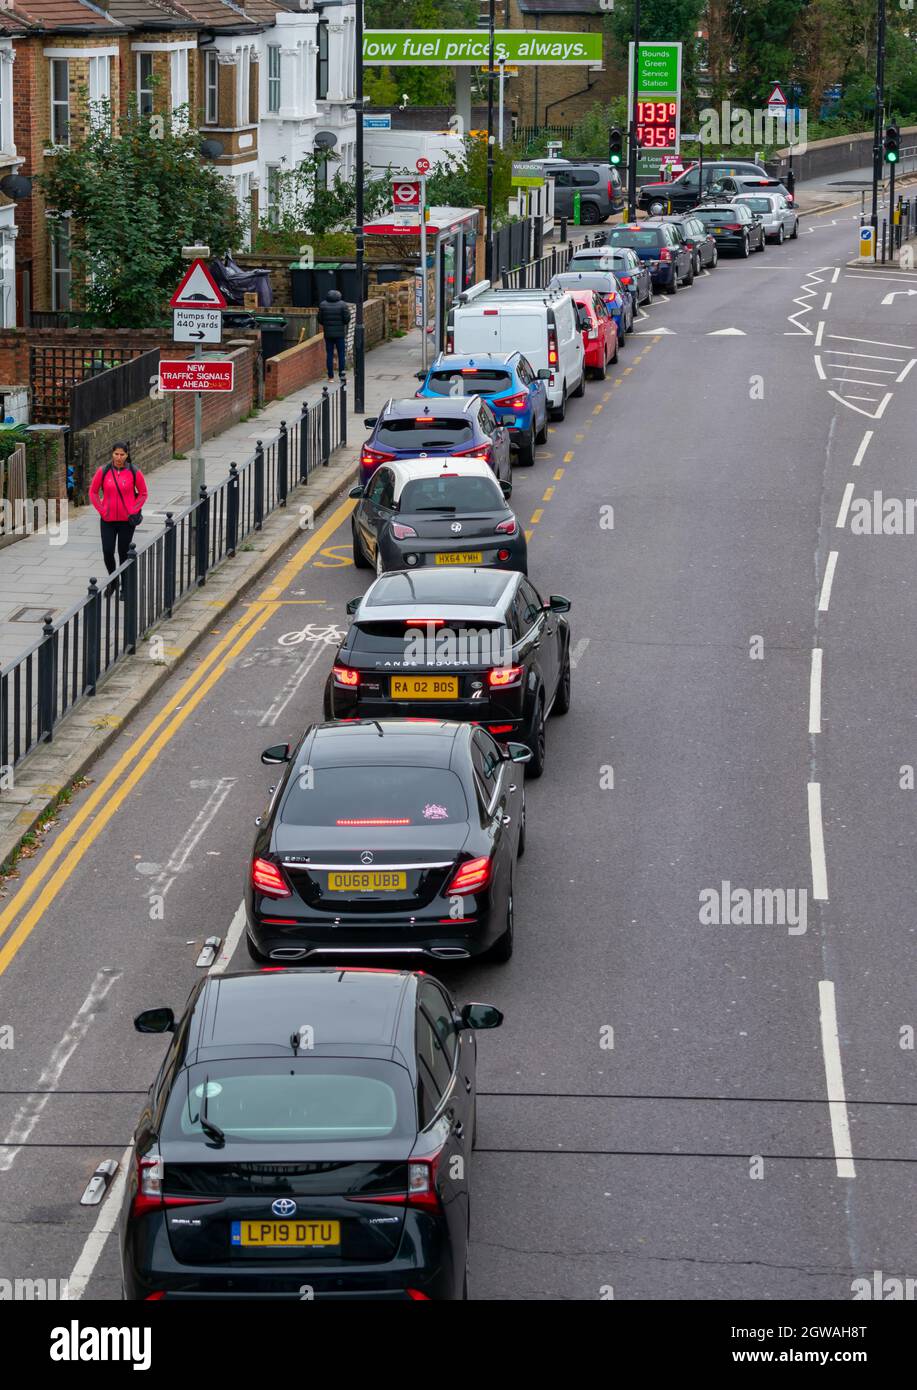 London. UK. 10.02.2021. Motorists struggling to get into a forecourt to refill the vehicles with no sign of fuel shortage crisis easing in the capital Stock Photo